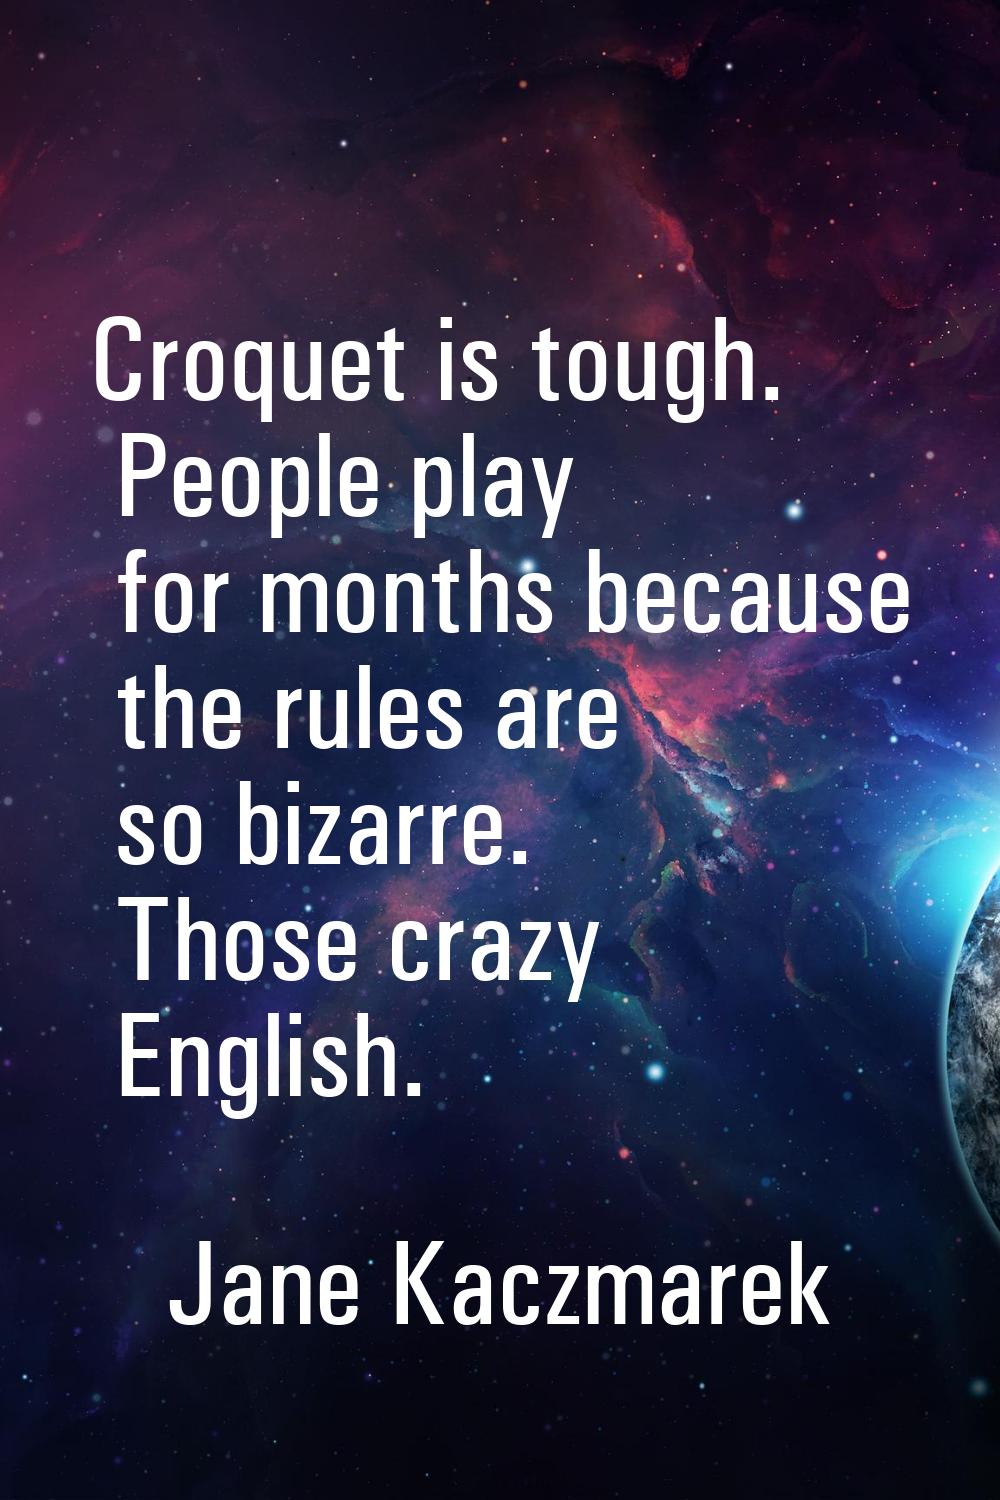 Croquet is tough. People play for months because the rules are so bizarre. Those crazy English.